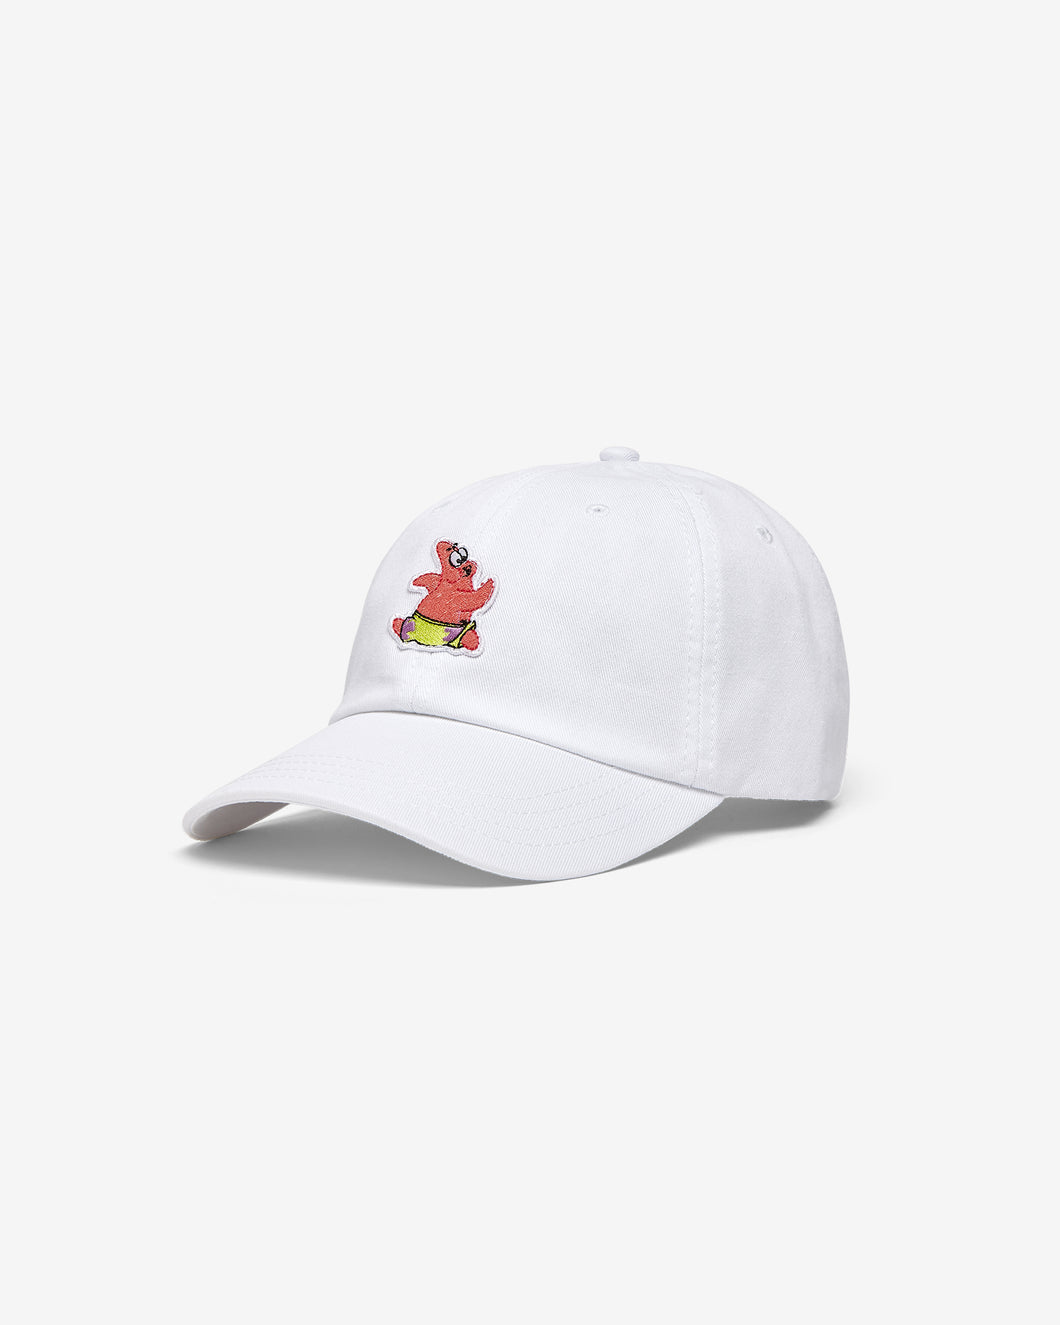 Patrick Embroidered Baseball Hat : Unisex Hats Off White | GCDS